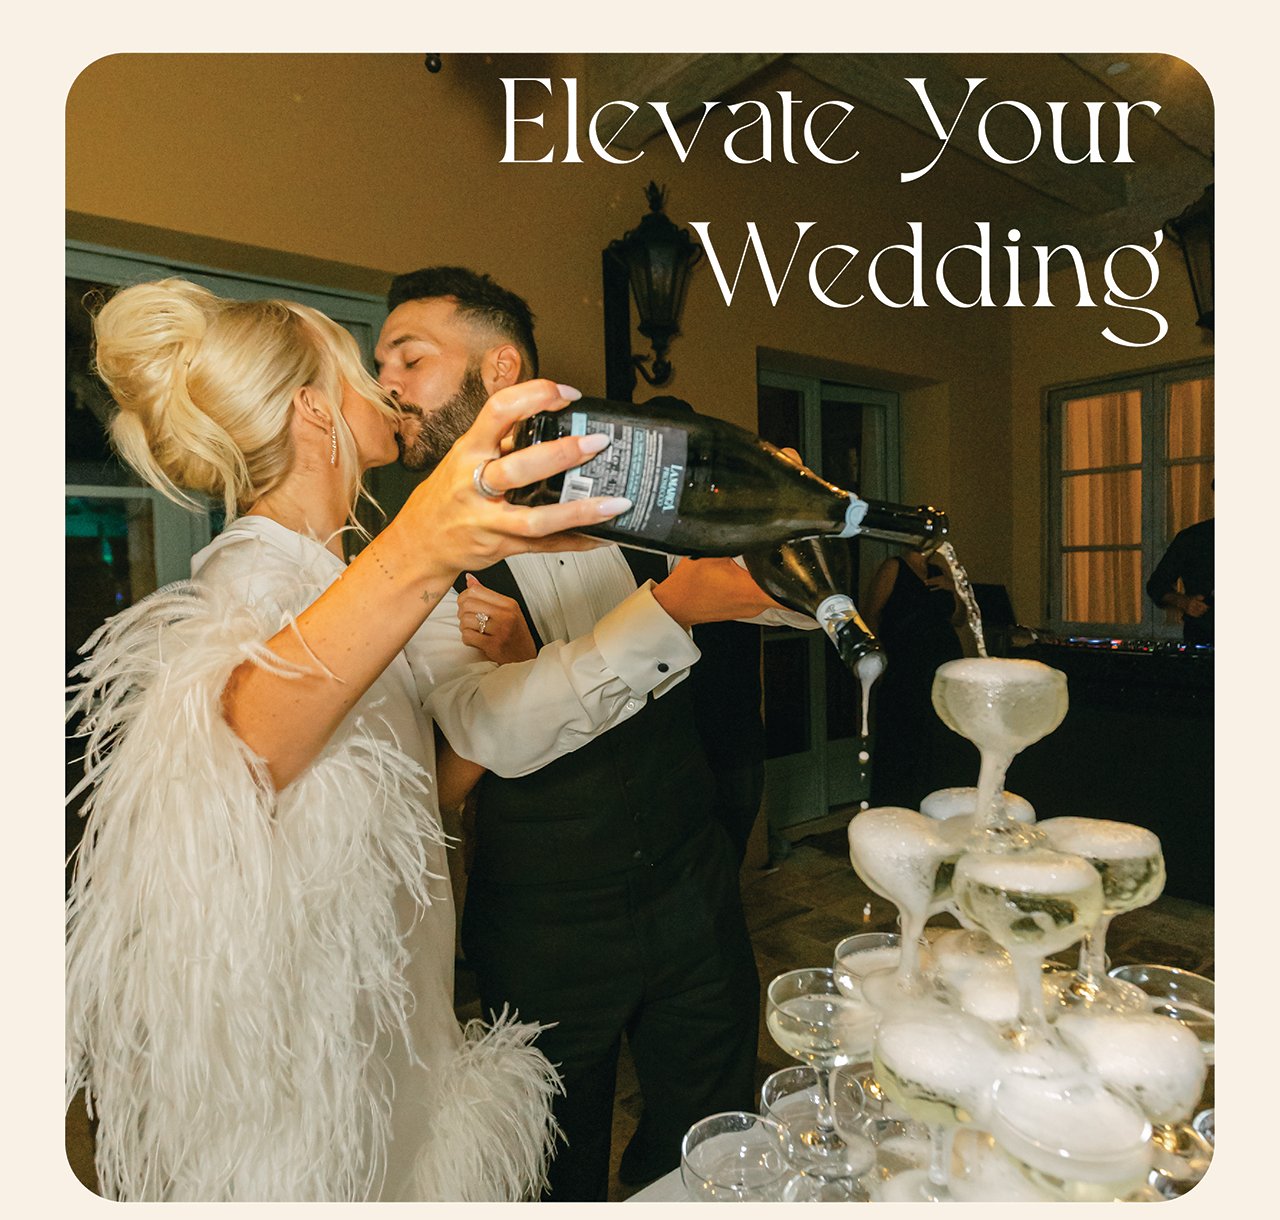 Elevate your wedding, couple kissing while pouring a champagne tower